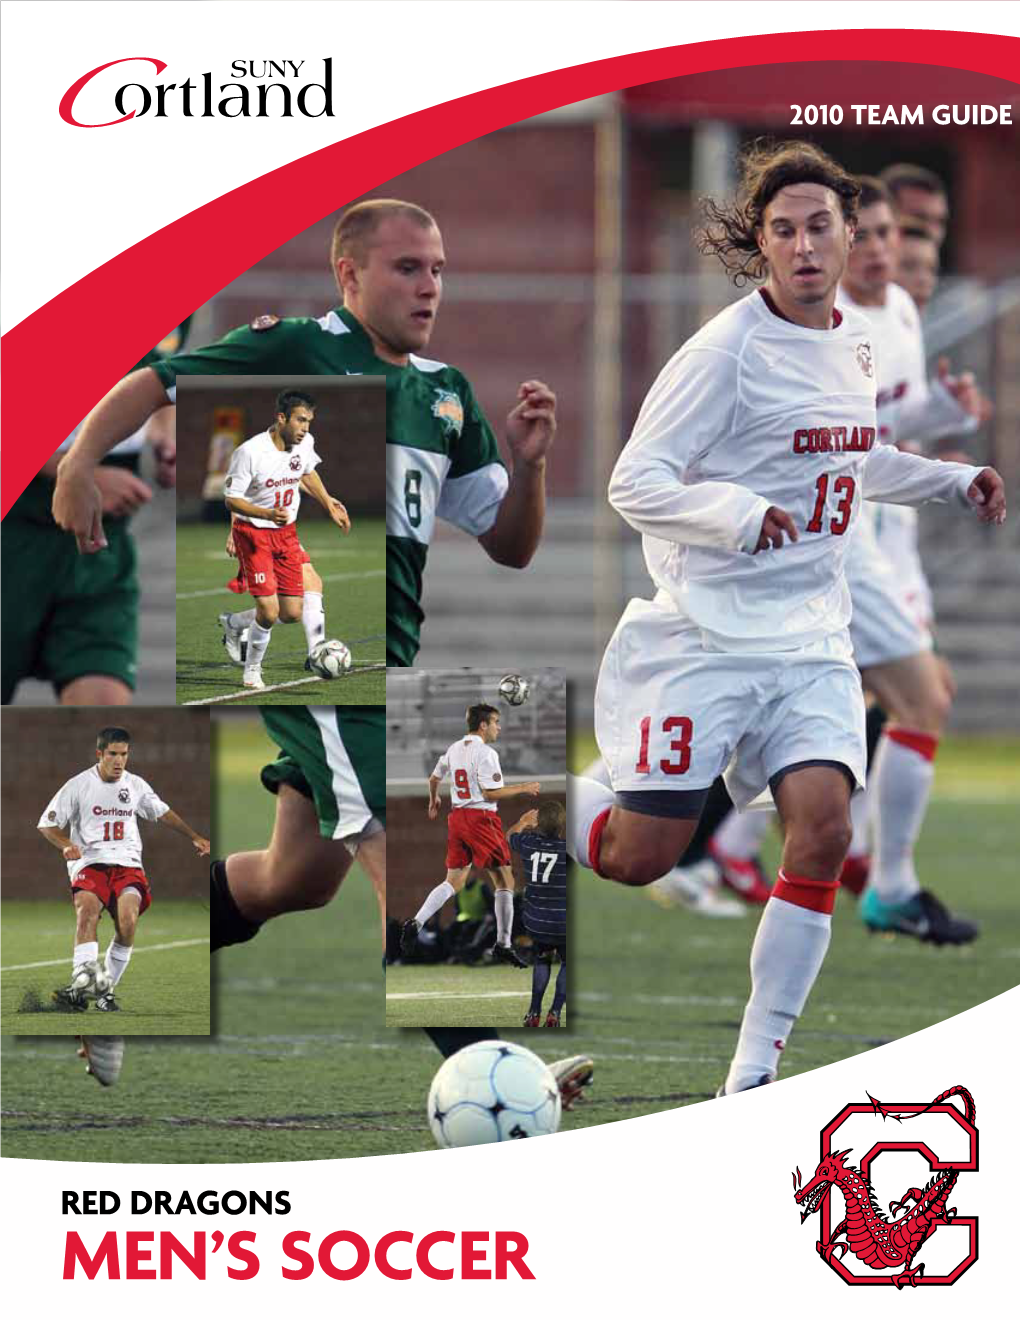 RED DRAGONS MEN’S SOCCER 2010 Season Preview After a Disappointing 2009 the Midfield Features Four Season That Included Six One-Goal Returners and Three Newcomers